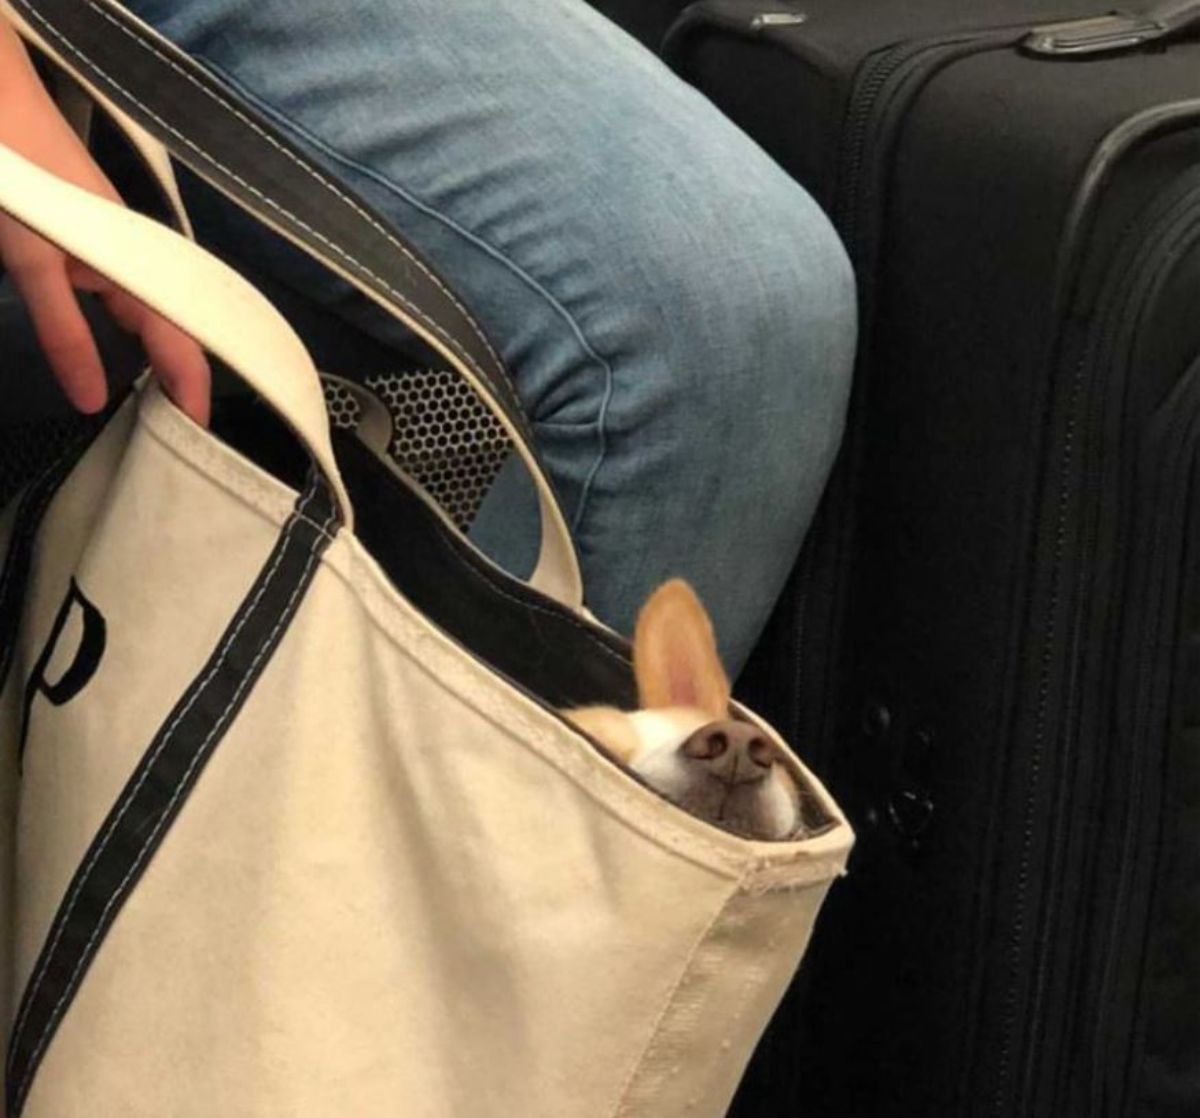 brown and white dog's nose is sticking out of a white and black bag